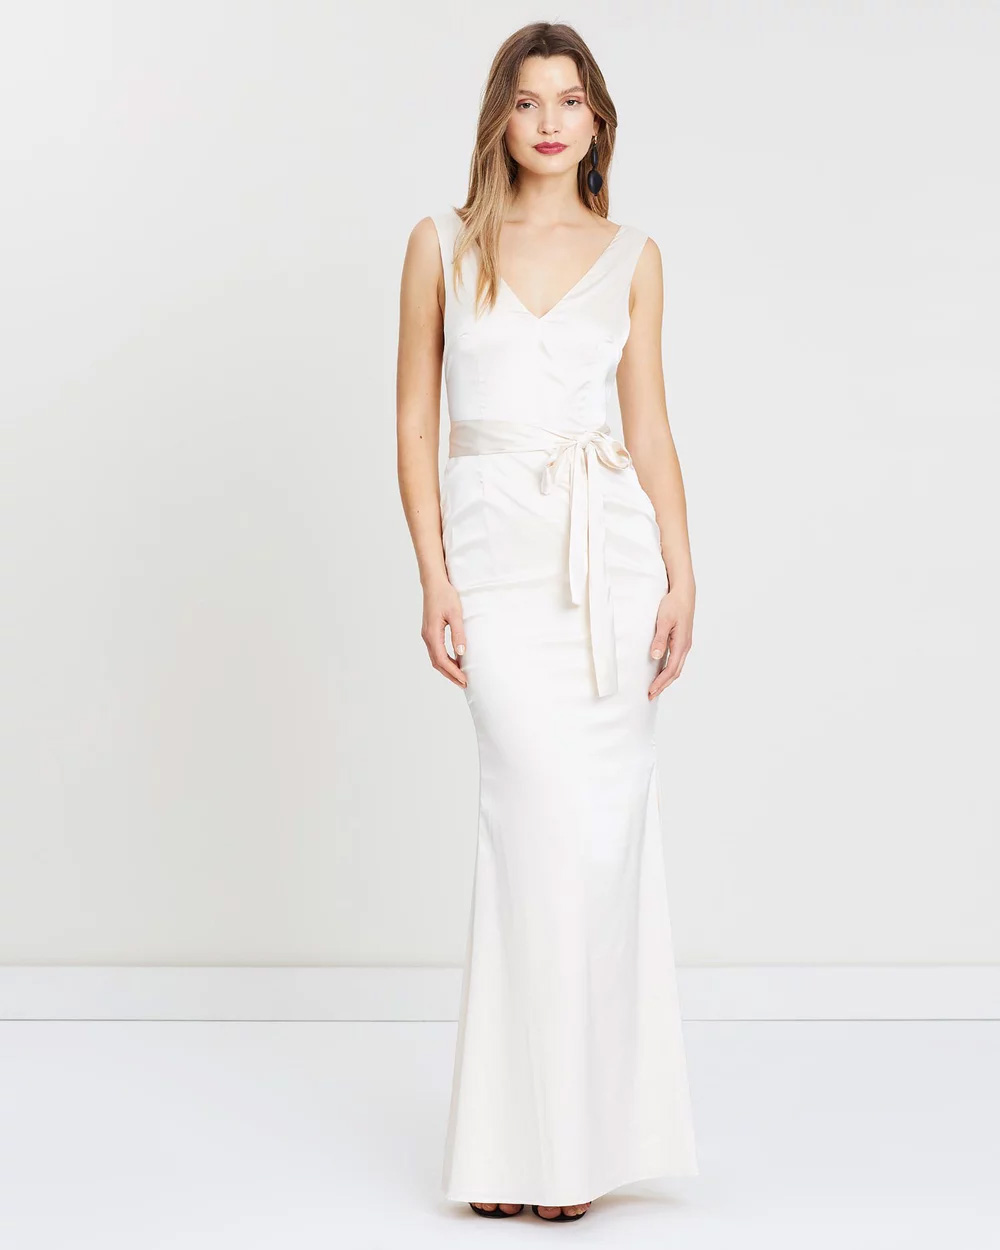 Miss Holly Thira dress, $149 AUD from The Iconic | Non-bridal dresses you could 100% get married in